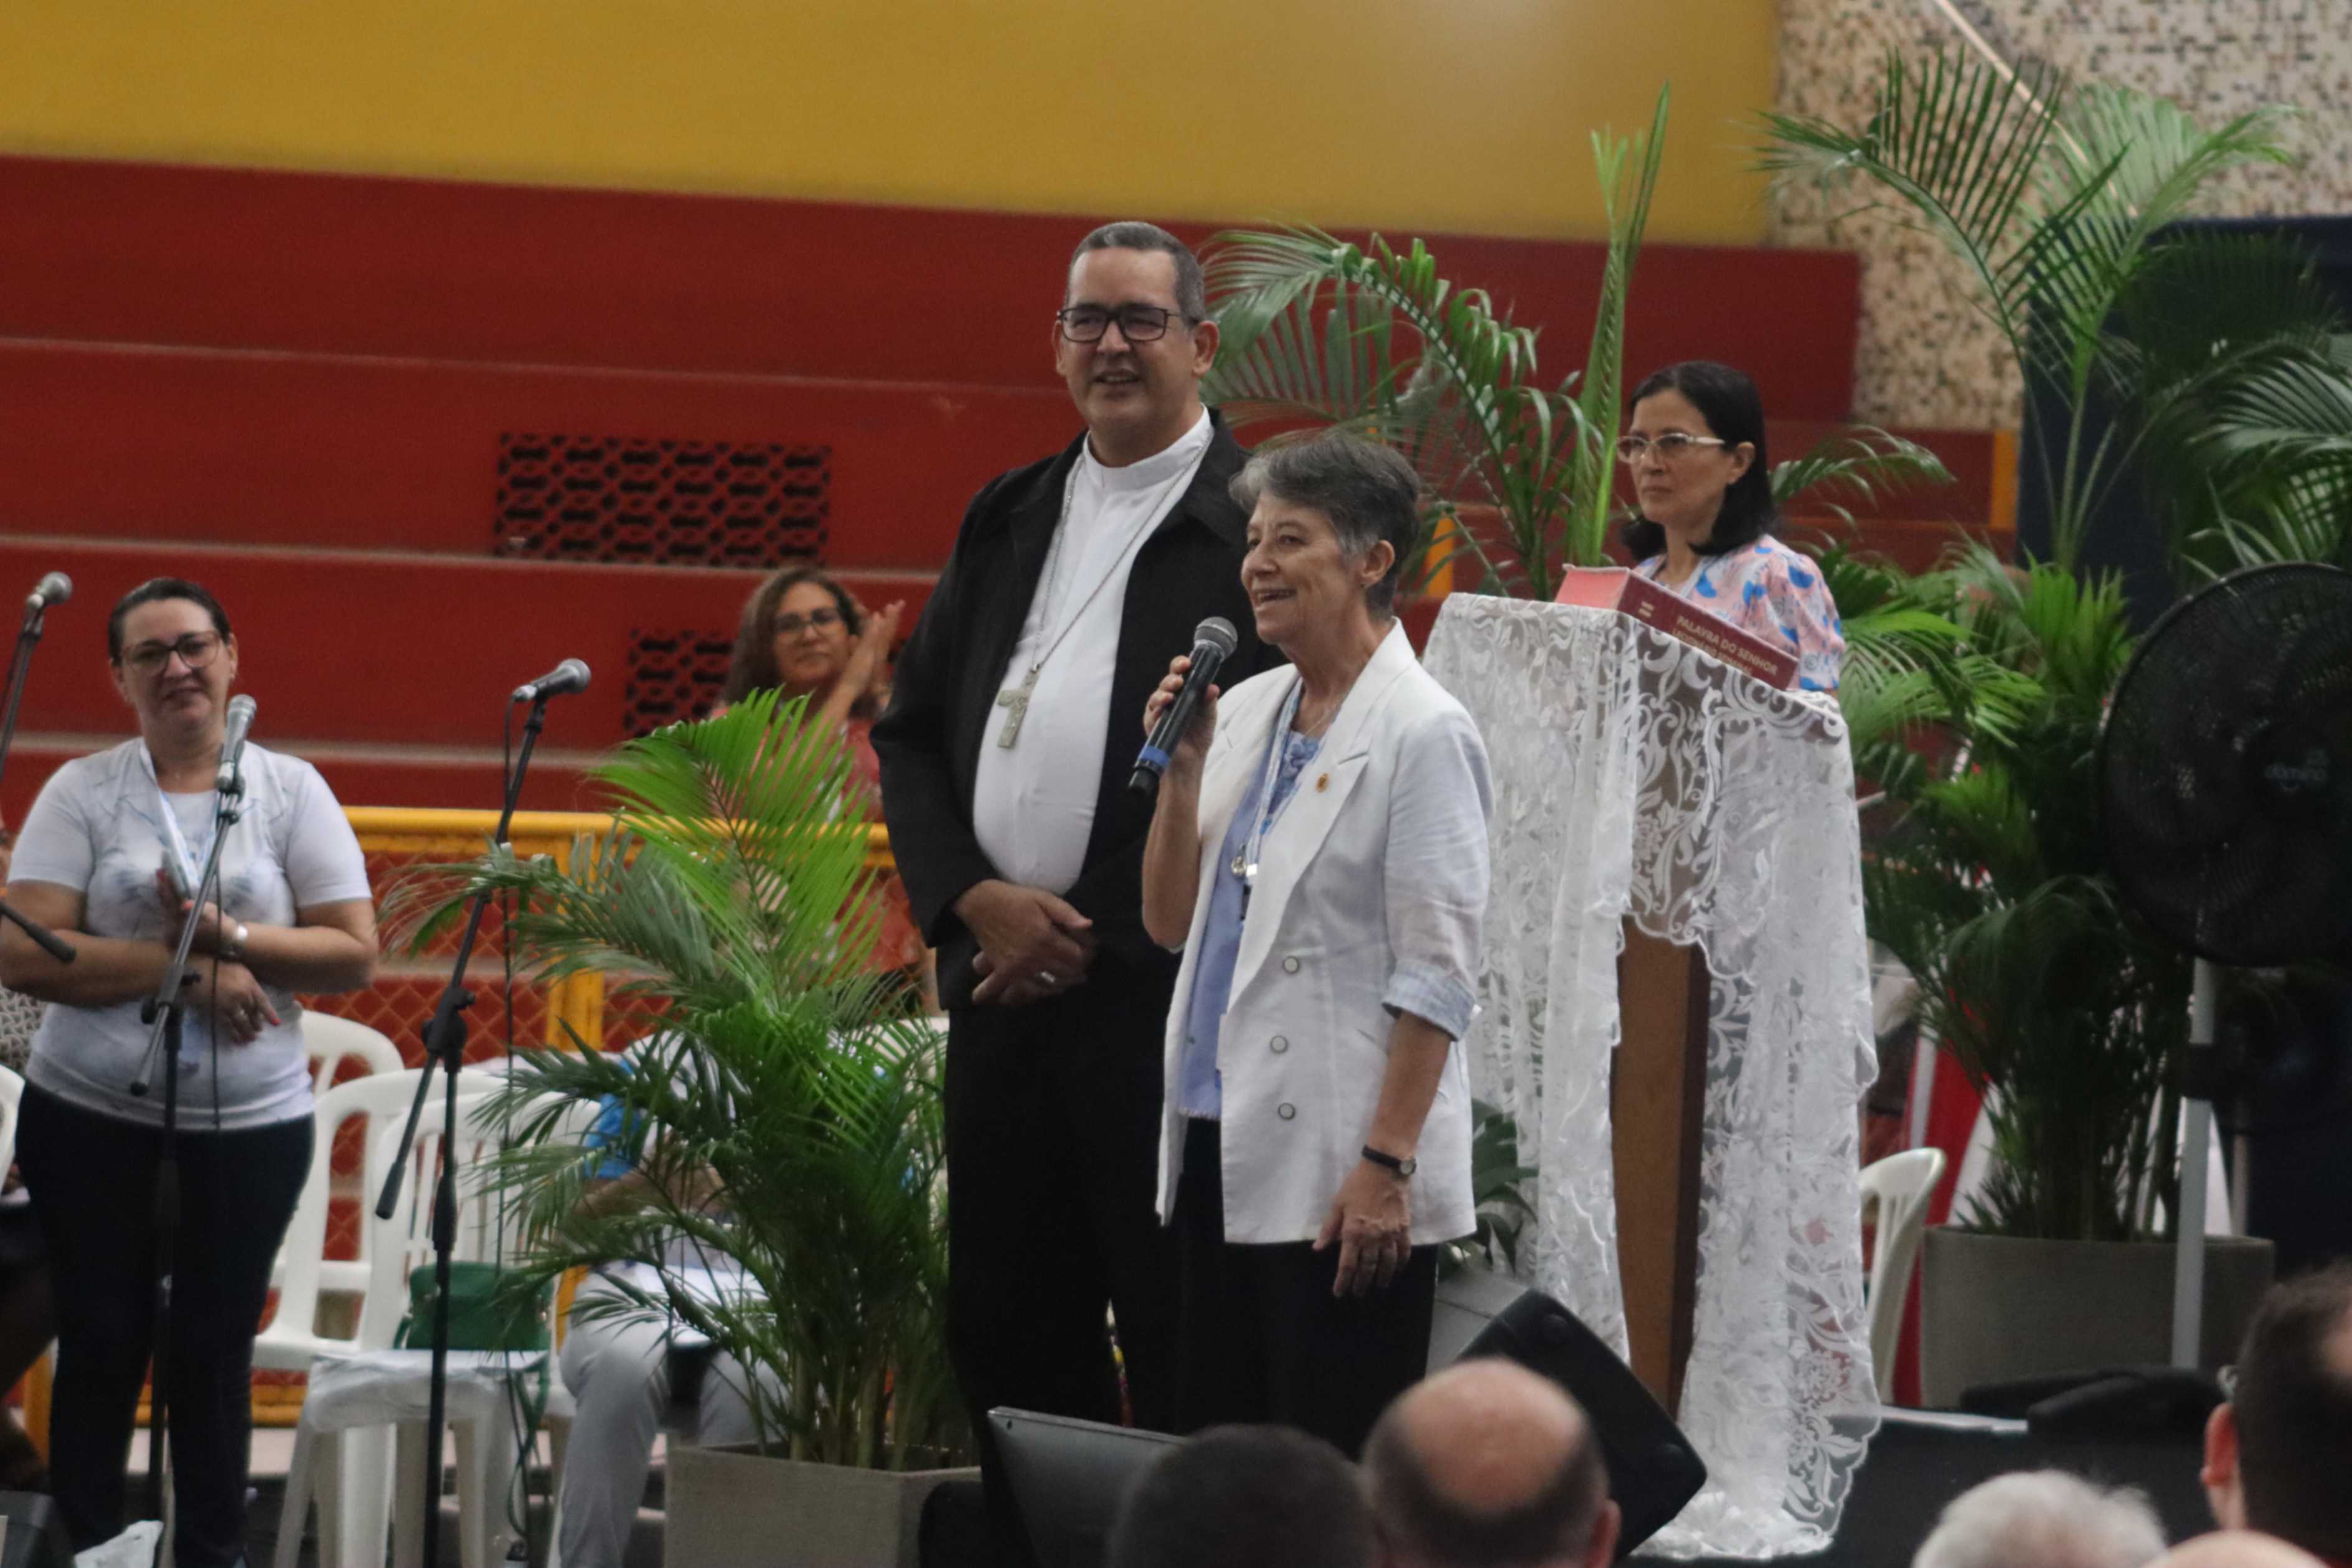 Sr. Eliane Cordeiro, president of the Congress of Religious of Brazil, speaks to participants in Fortaleza during the celebration of the conference's 70th anniversary. (Courtesy of CRB)